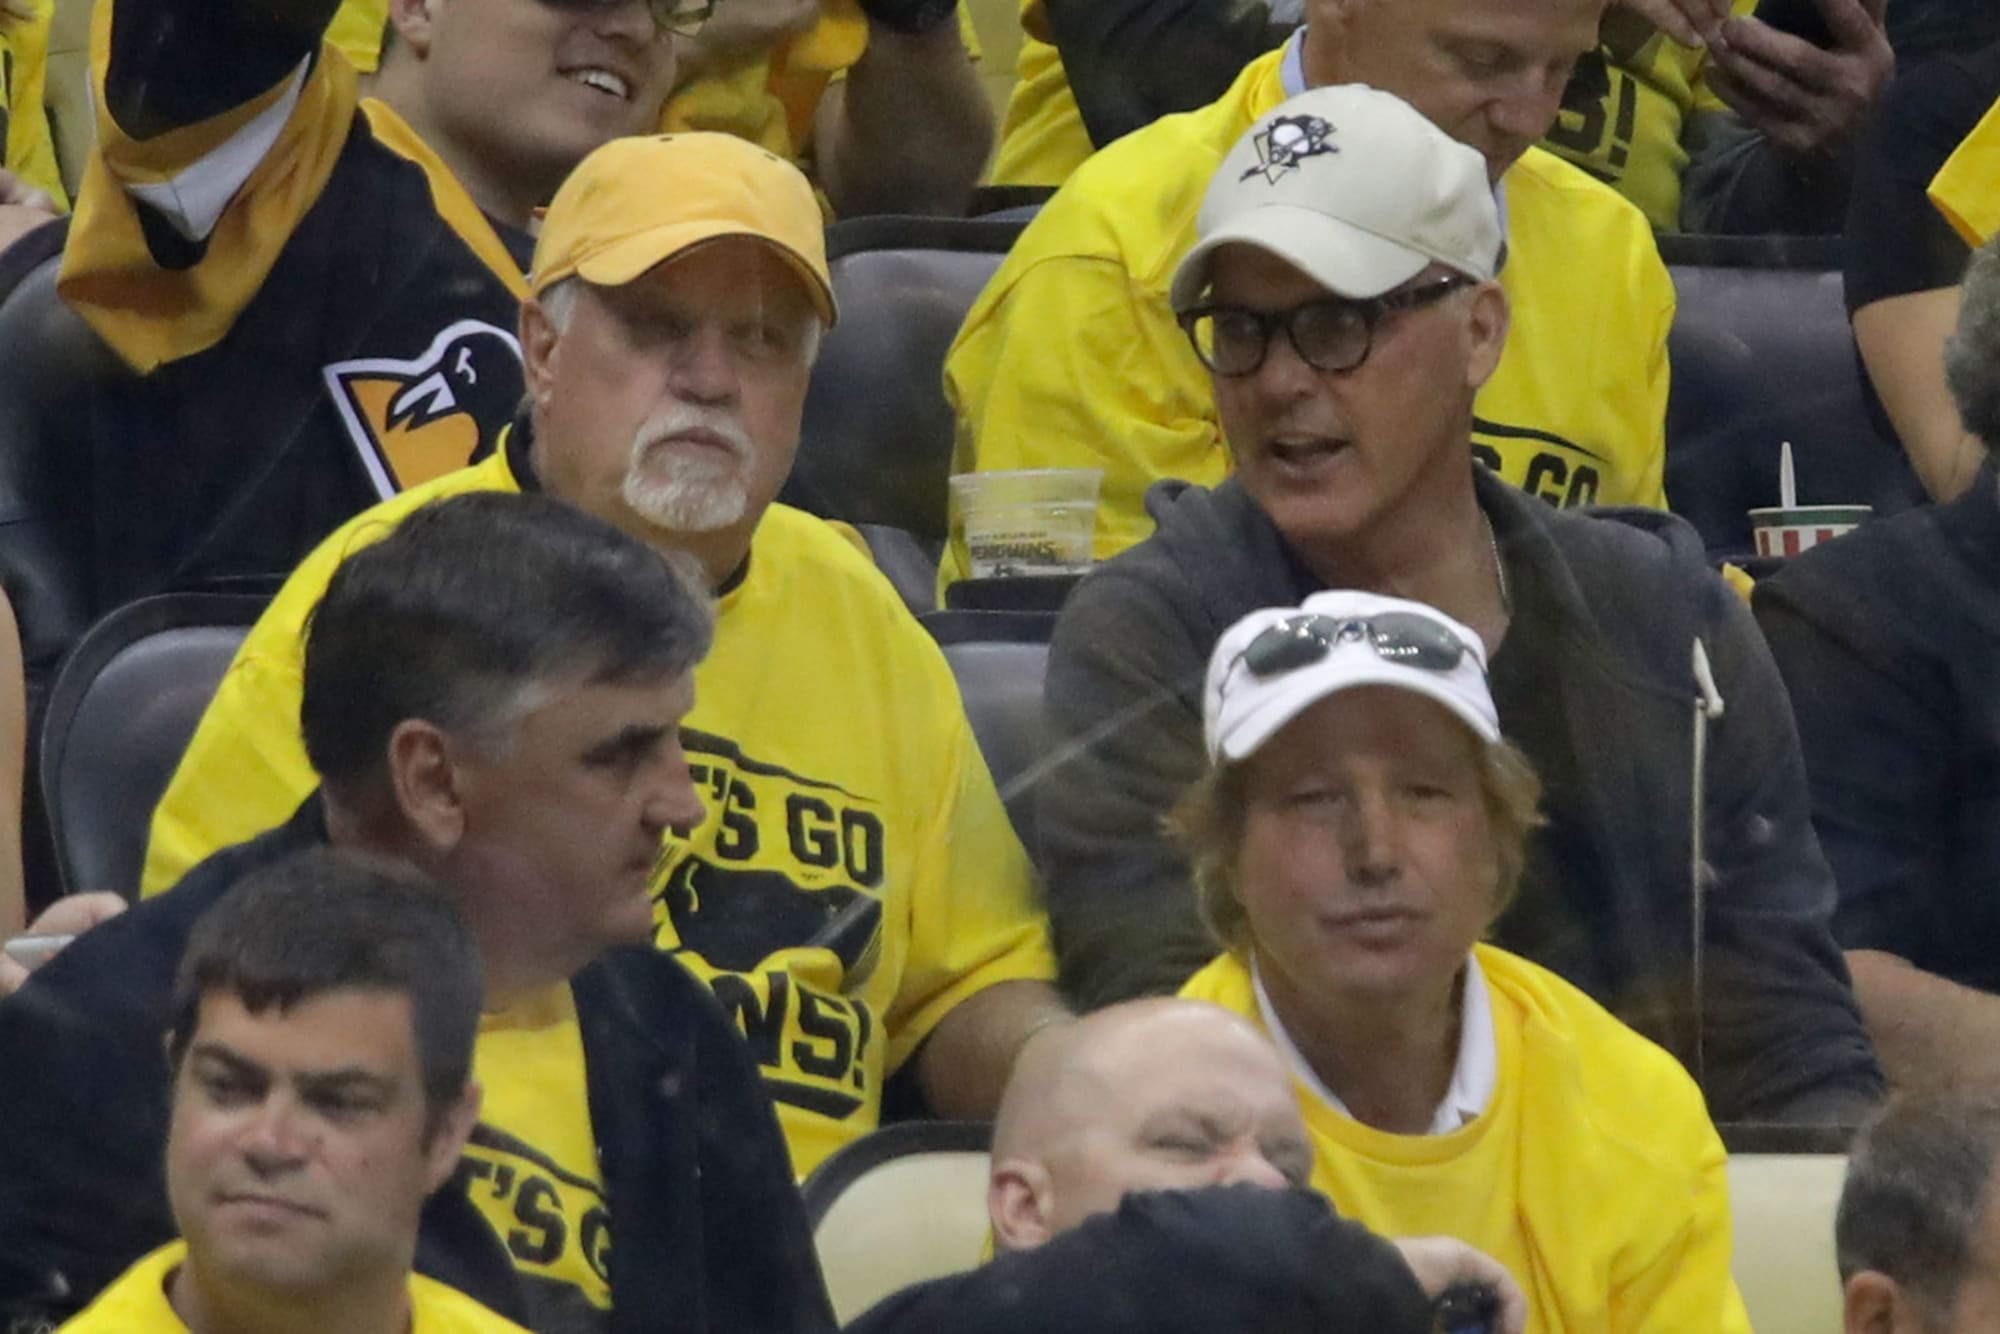 Sociologi underviser Ansøger The who's who when it comes to celebrity Pittsburgh Penguins fans